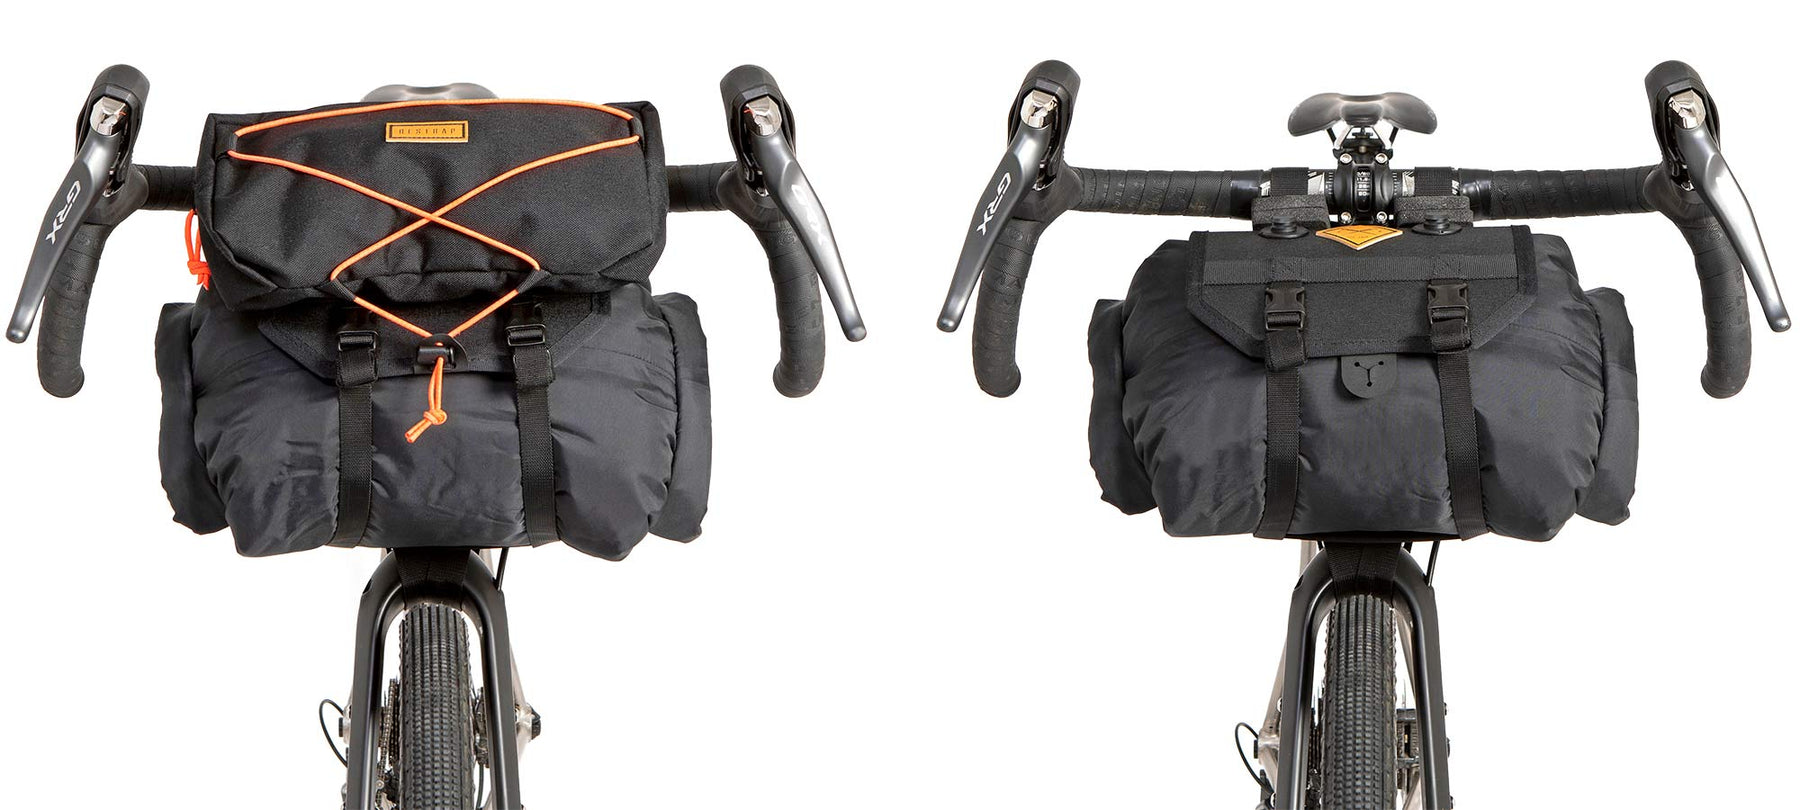 LafoBikes Now an Authorized Dealer of Restrap: Elevate Your Bikepacking Experience